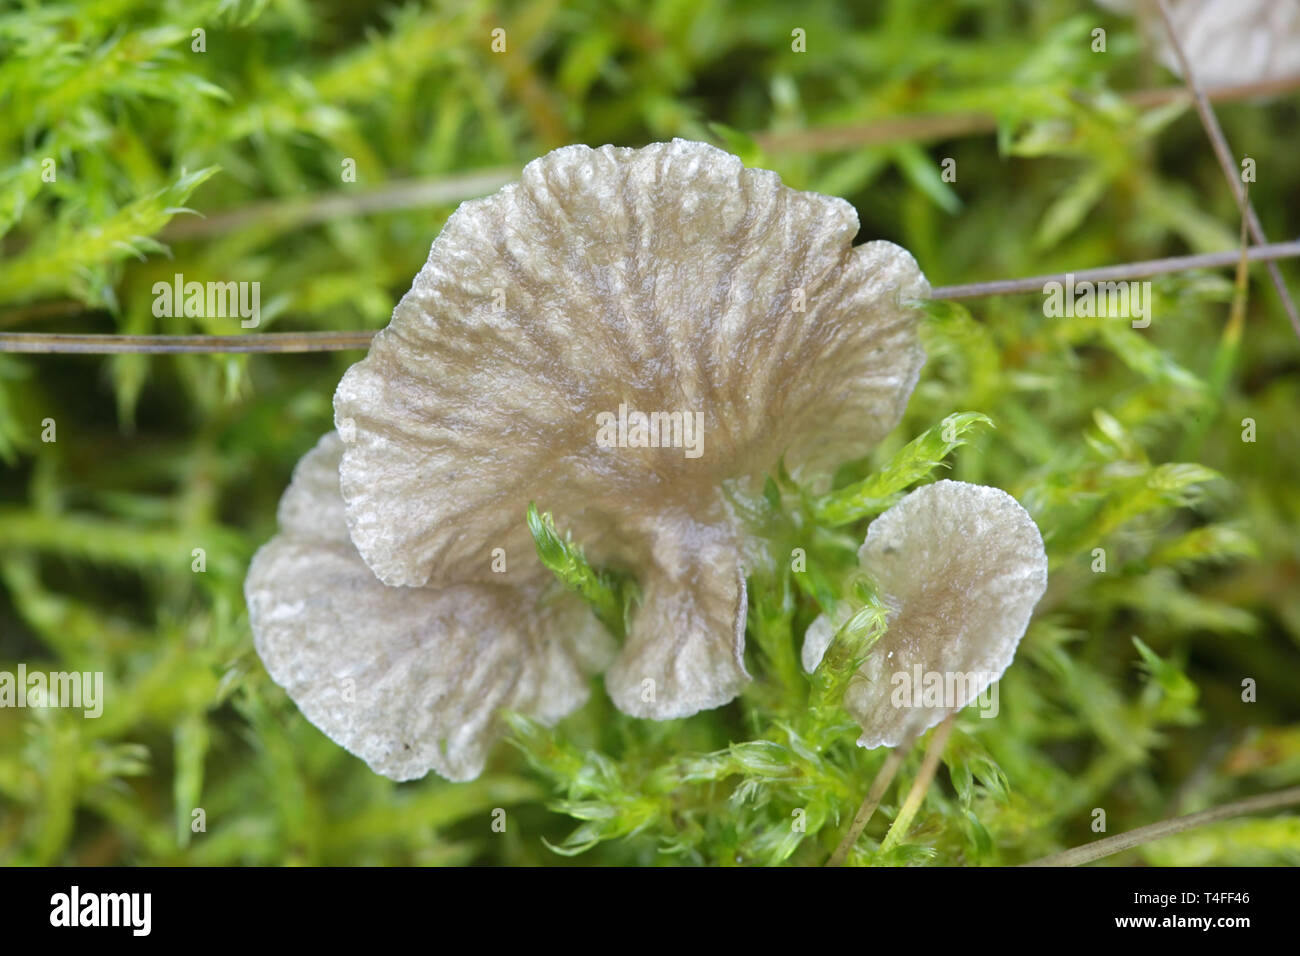 Arrhenia lobata, known as the lobed oysterling, wild mushroom from Finland Stock Photo